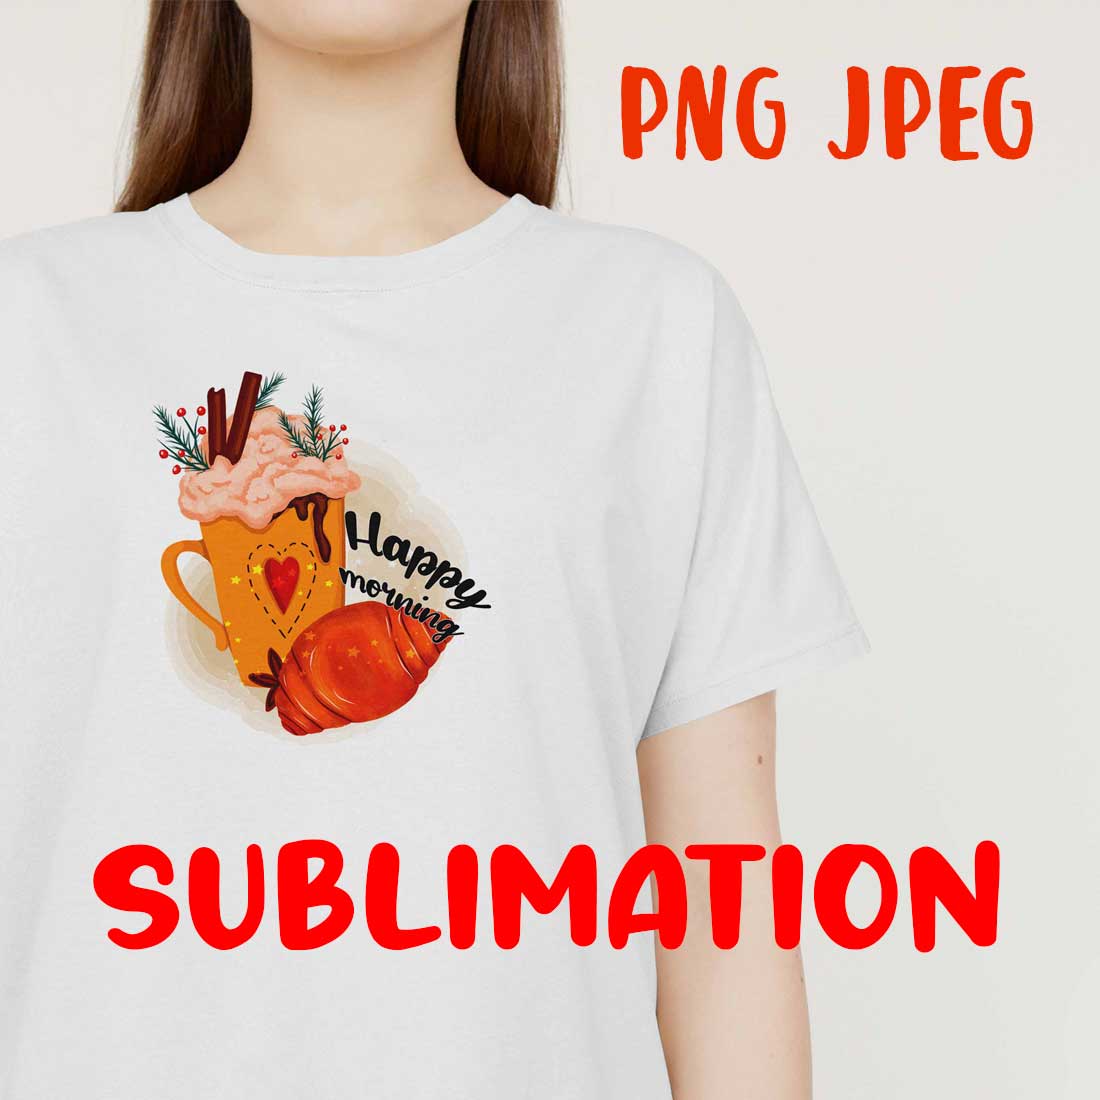 Happy Morning PNG Sublimation cover image.